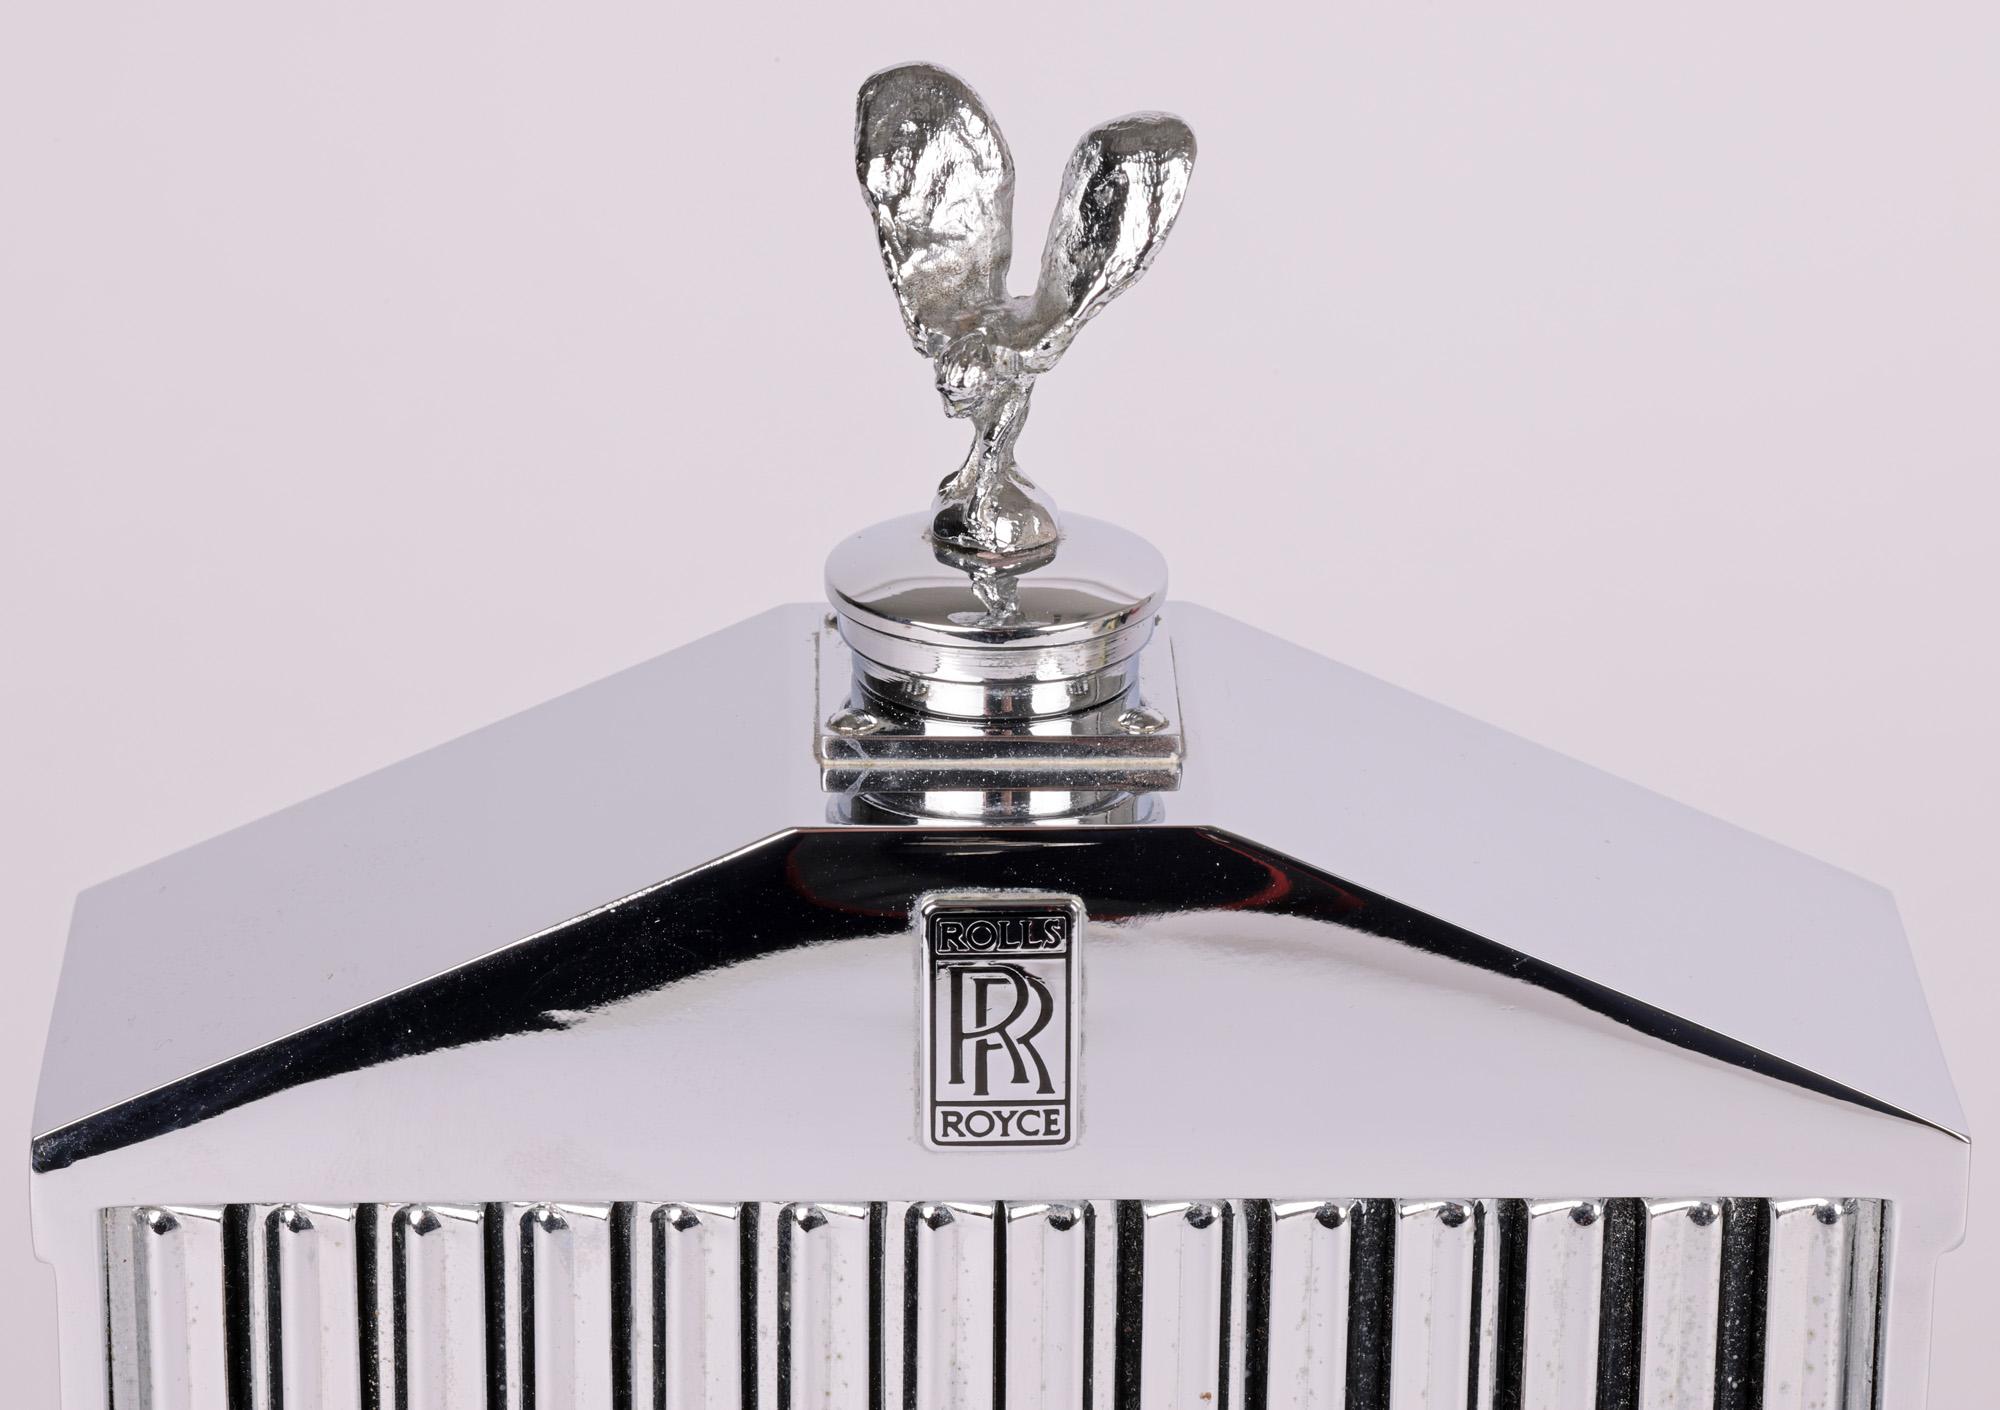 A wonderful display piece or indeed addition to any serious man cave is this exceptionally well made mid-century Classic Stable Rolls Royce radiator spirit decanter retailed through Harrods and dating from around 1960. The heavily made decanter is